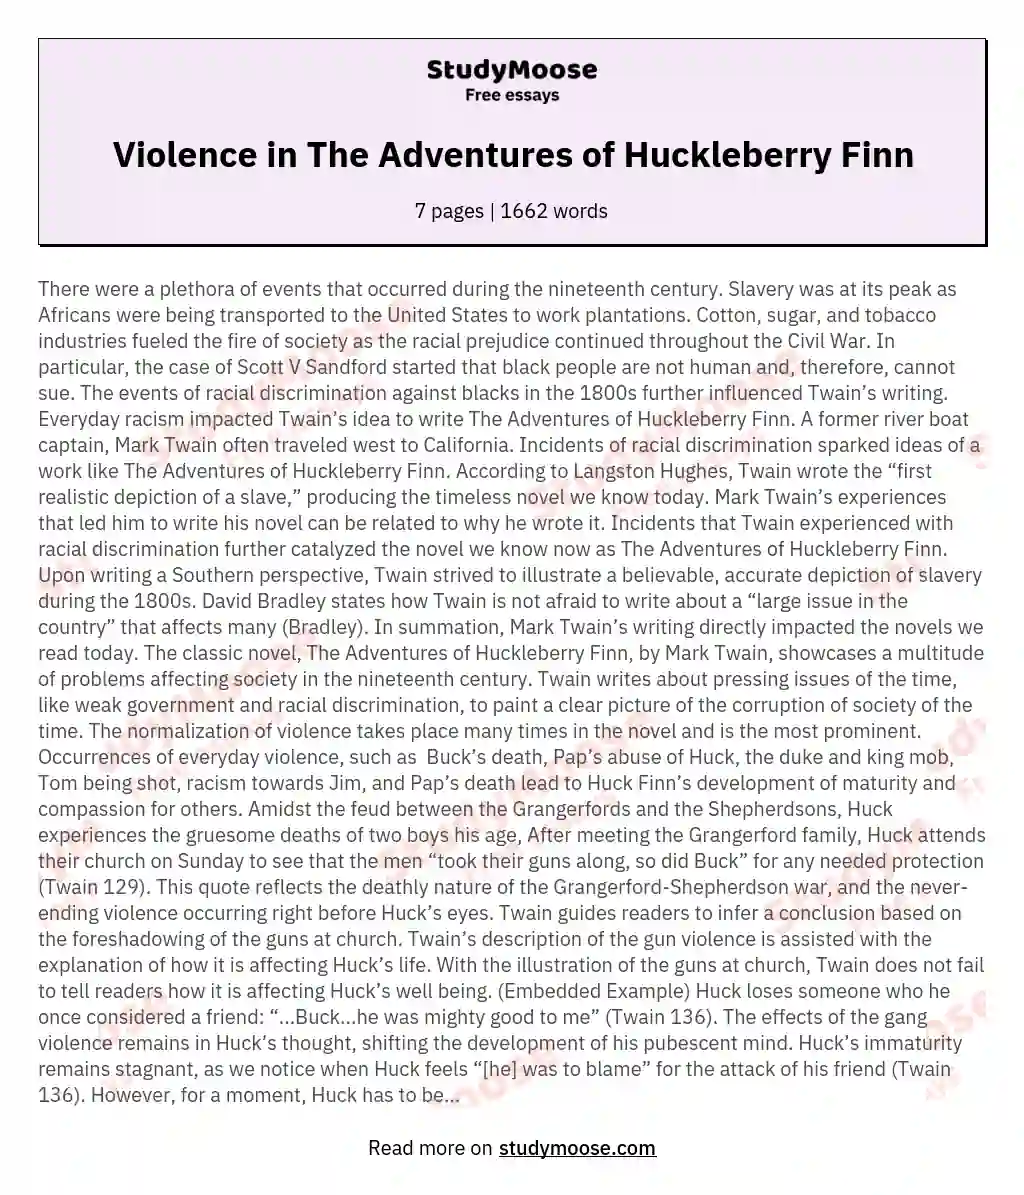 Violence in The Adventures of Huckleberry Finn essay